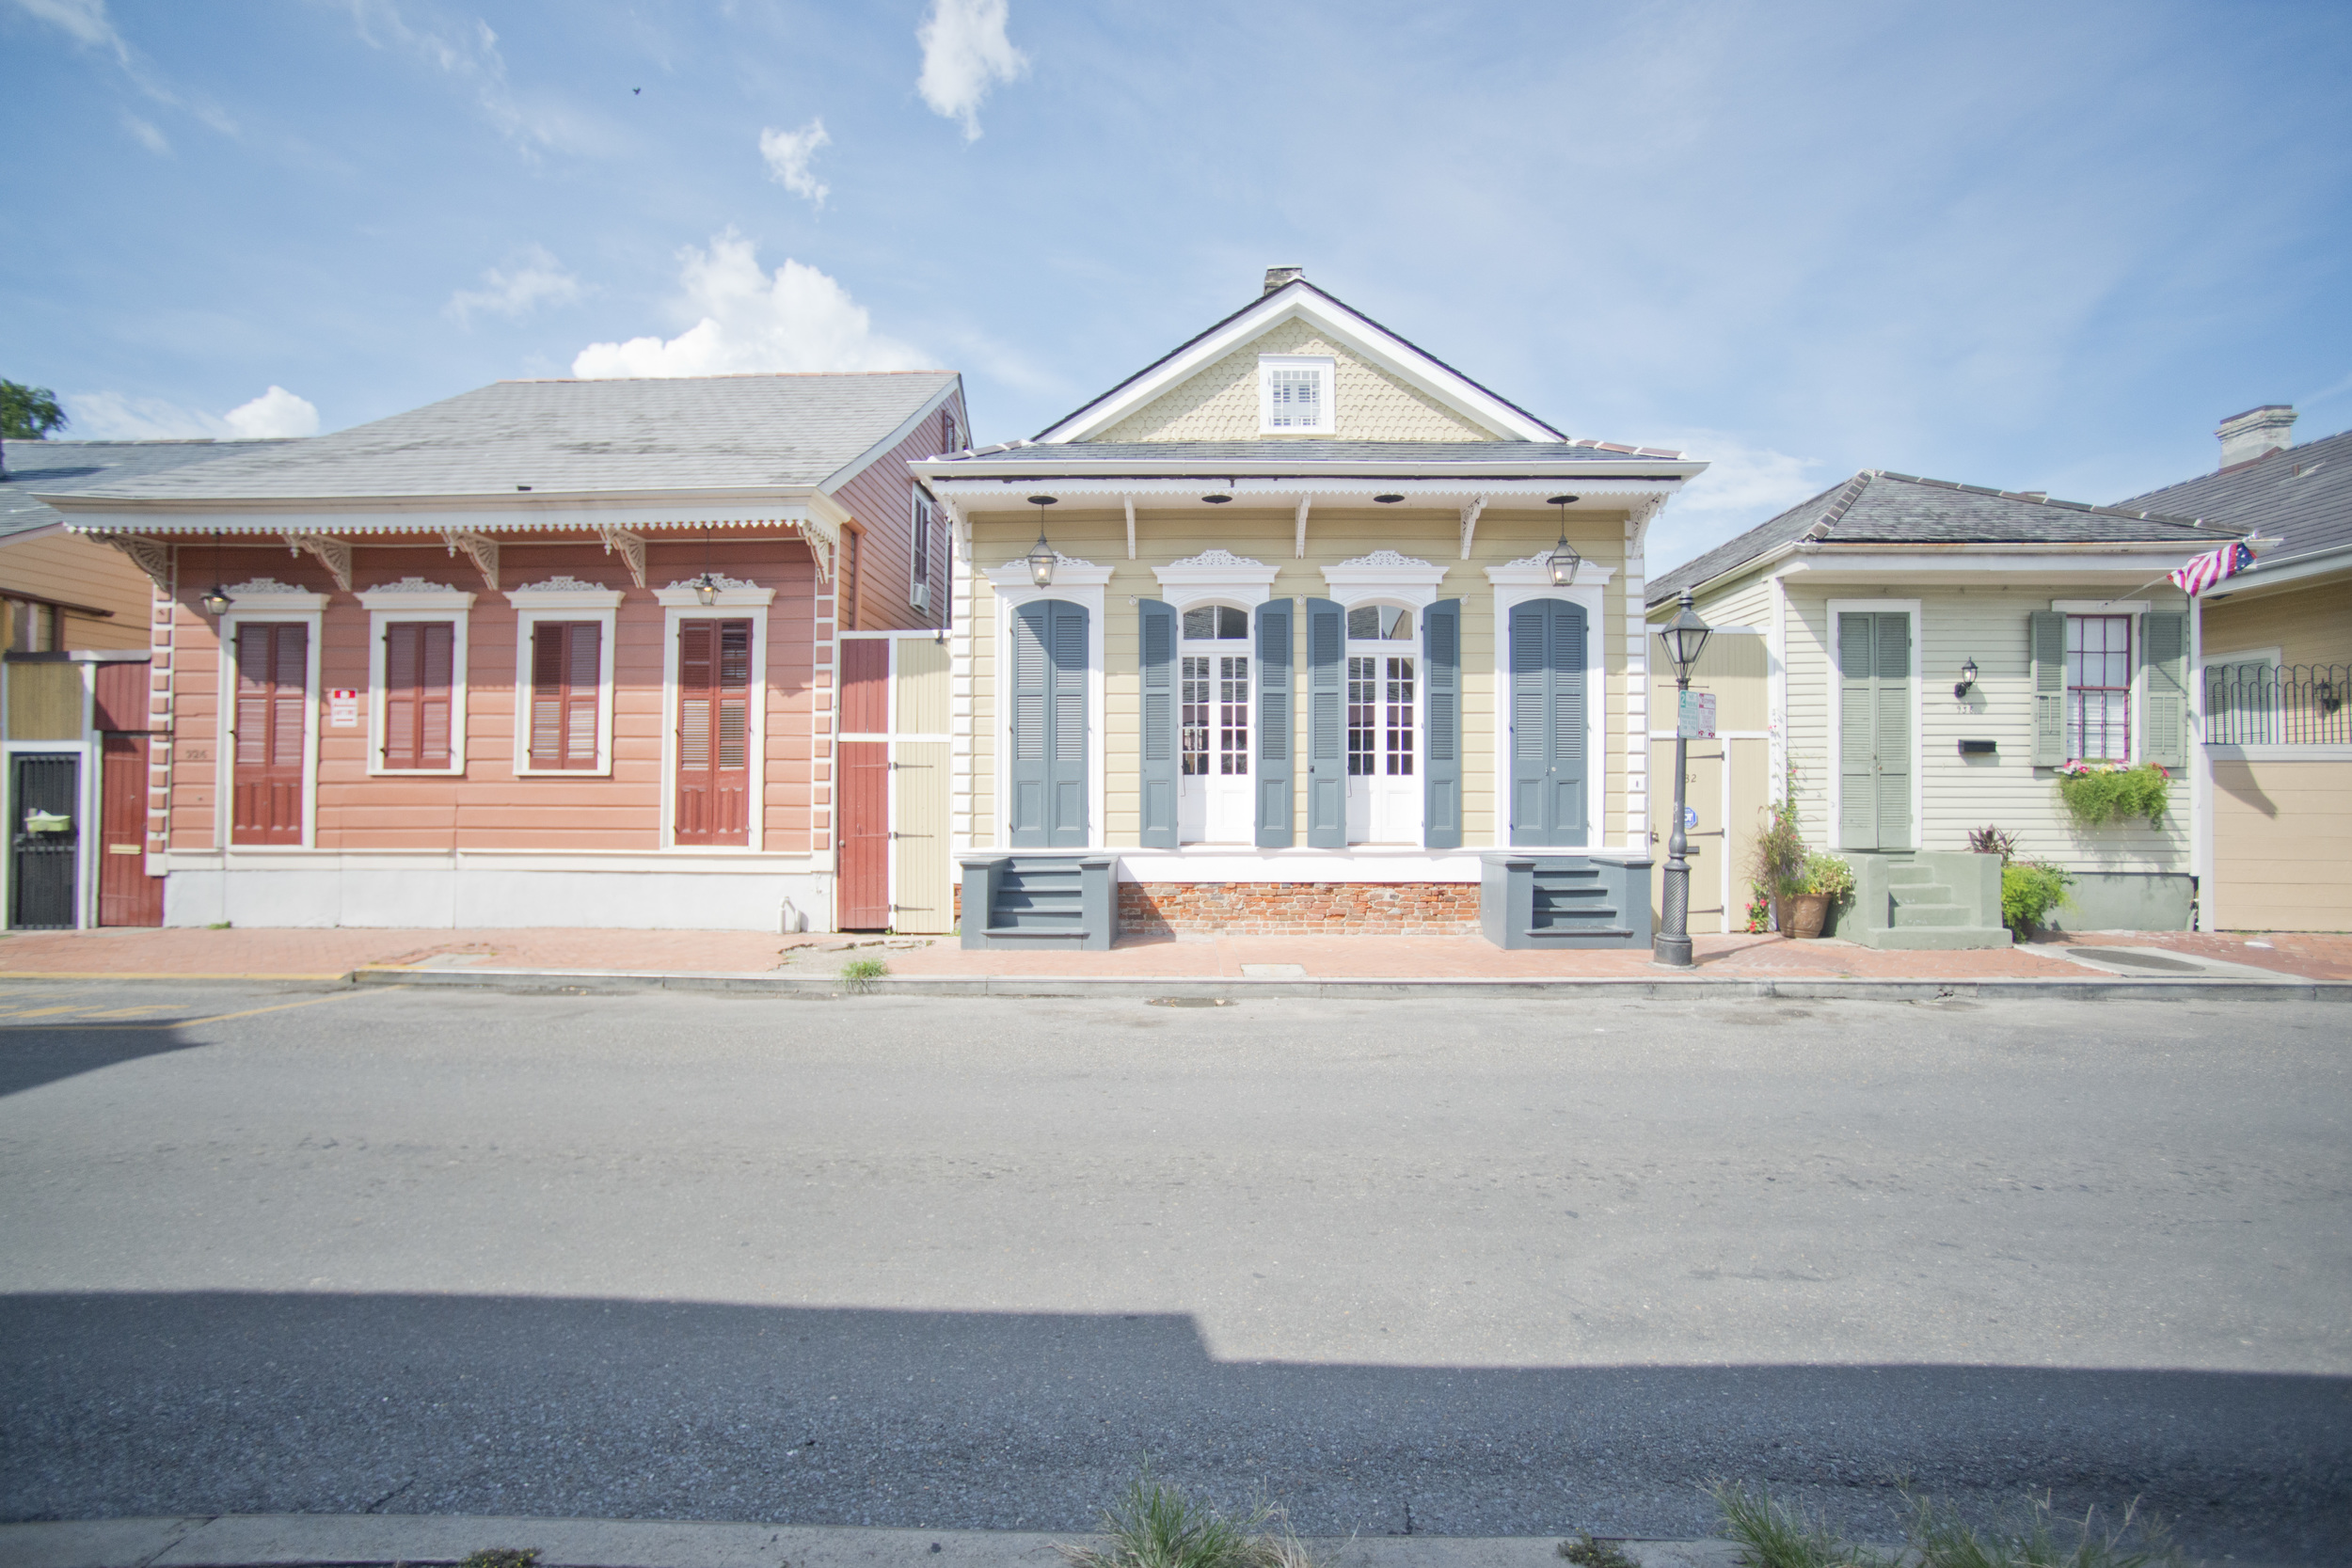 Design Guidelines for the Vieux Carre Historic District